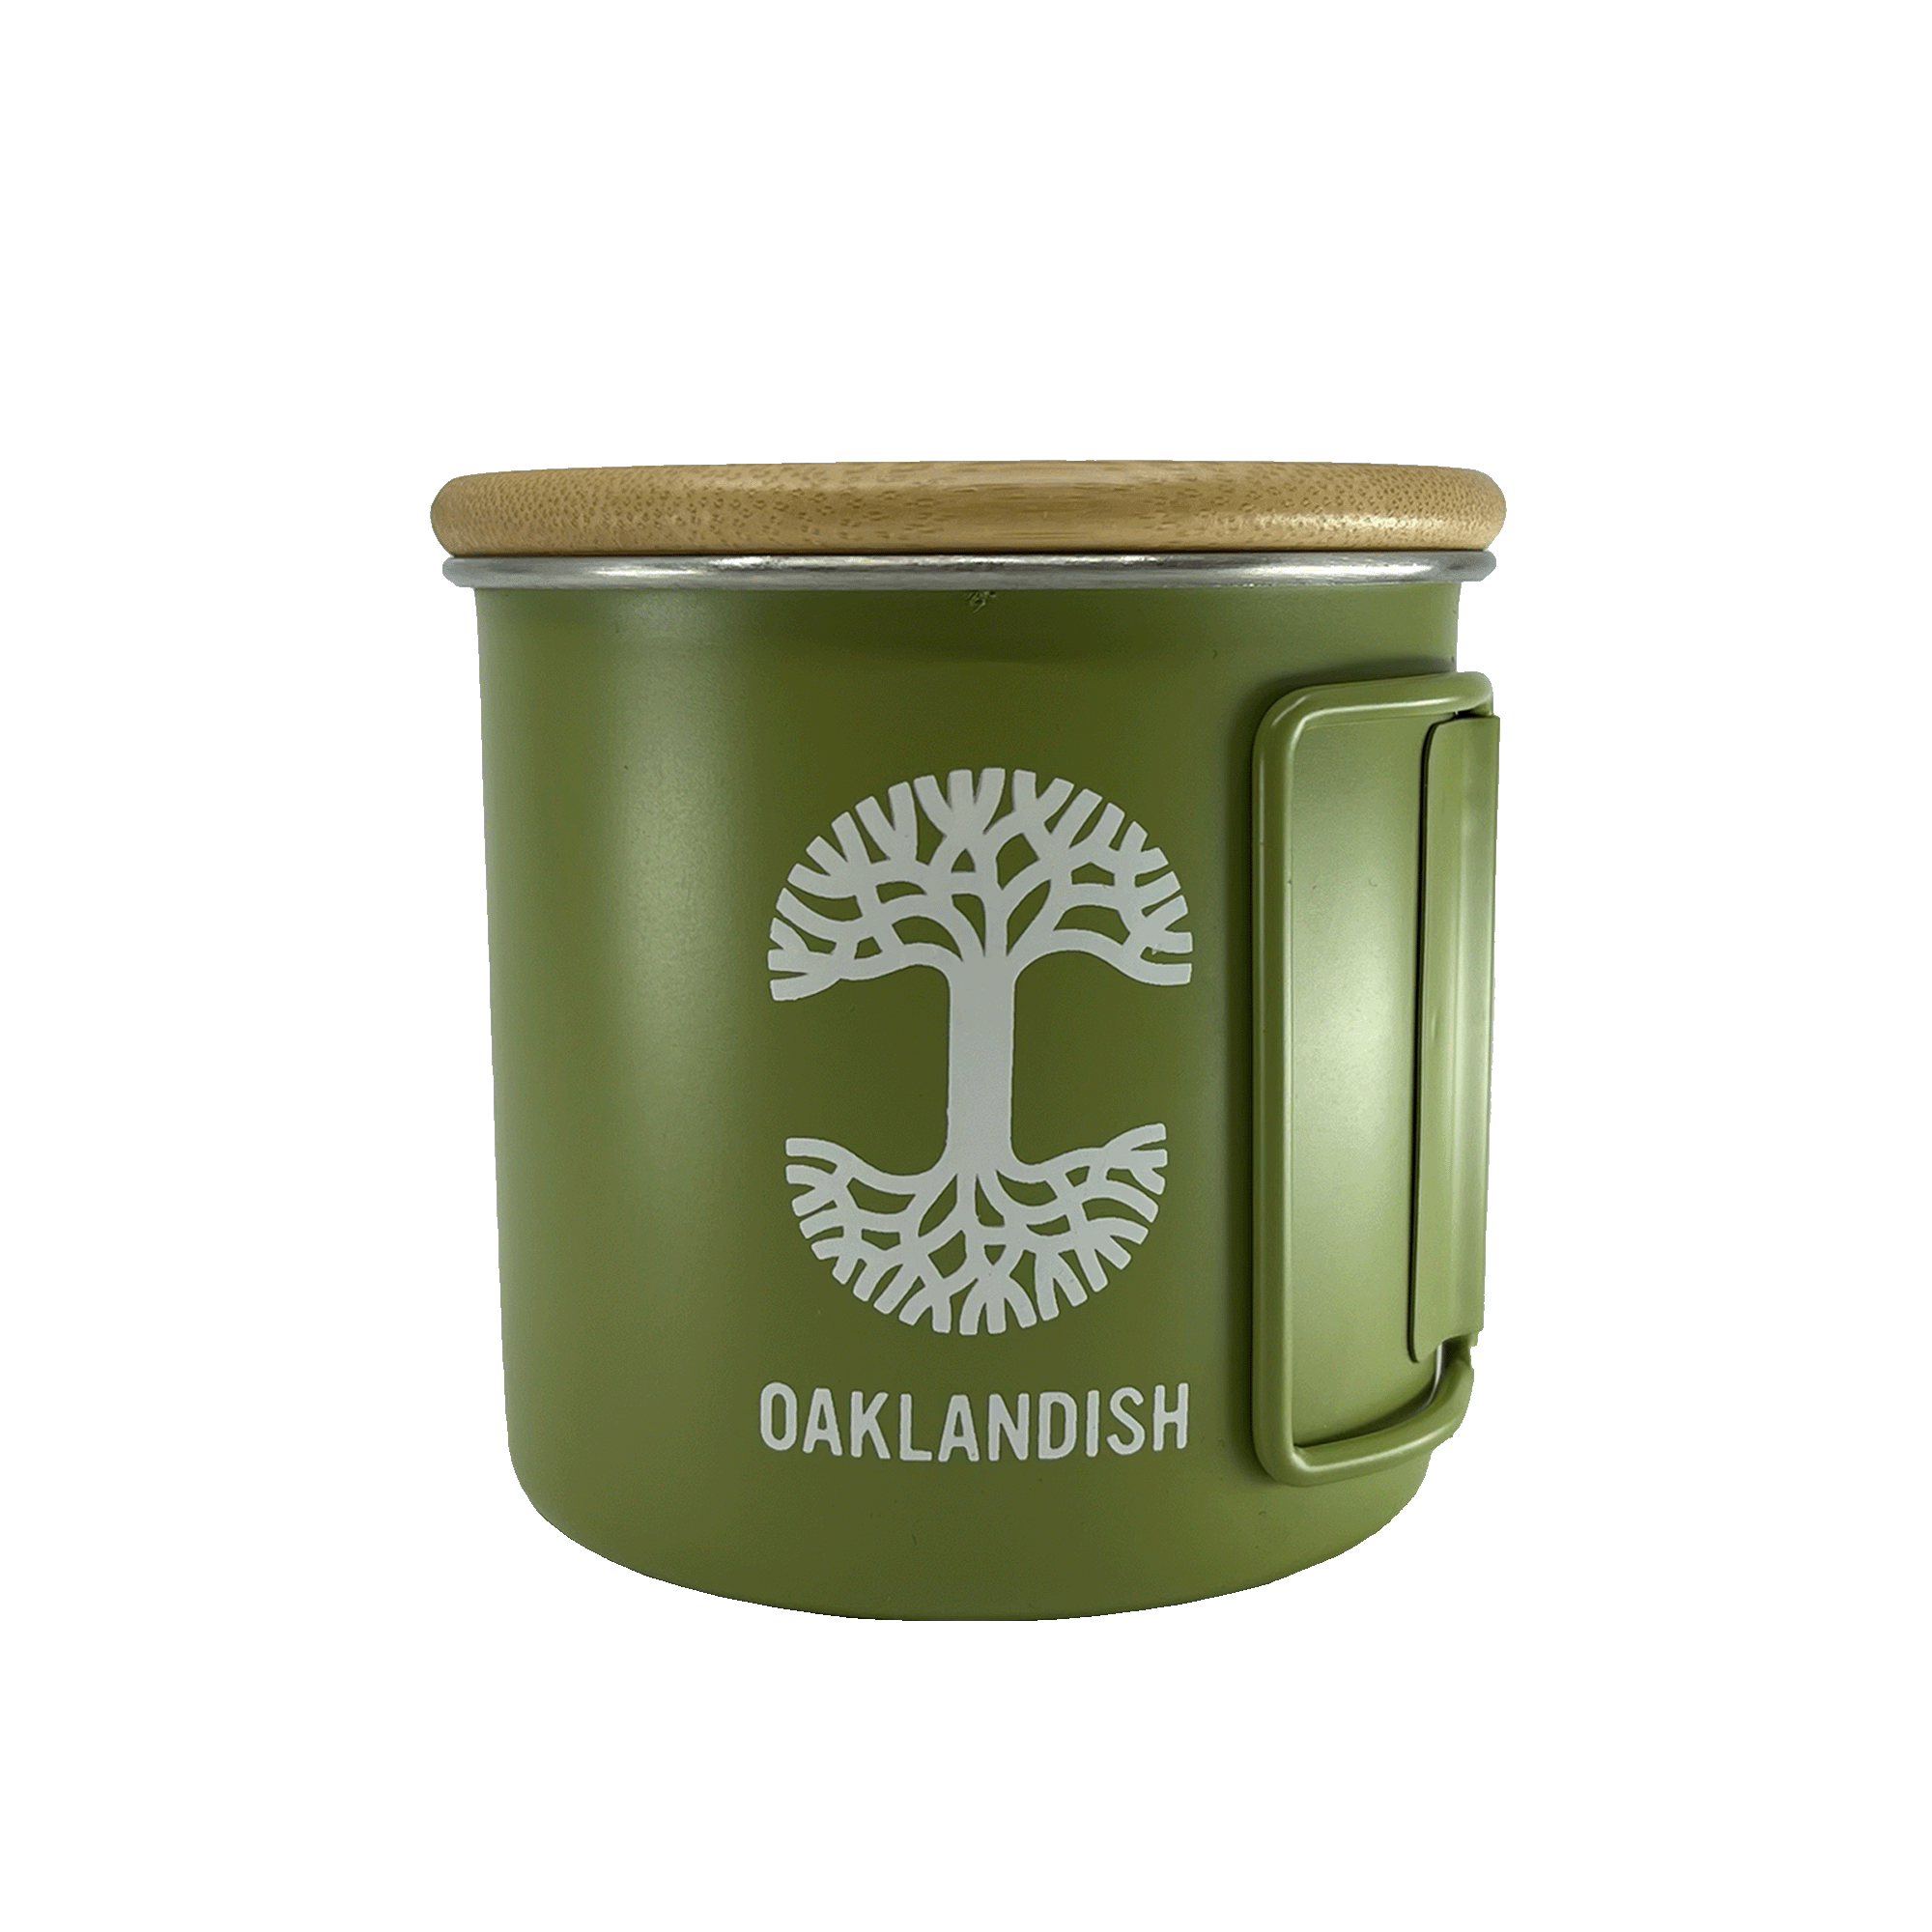 Green stainless steel camp mug with collapsable handles, bamboo lid, and large white Oaklandish tree logo and wordmark.